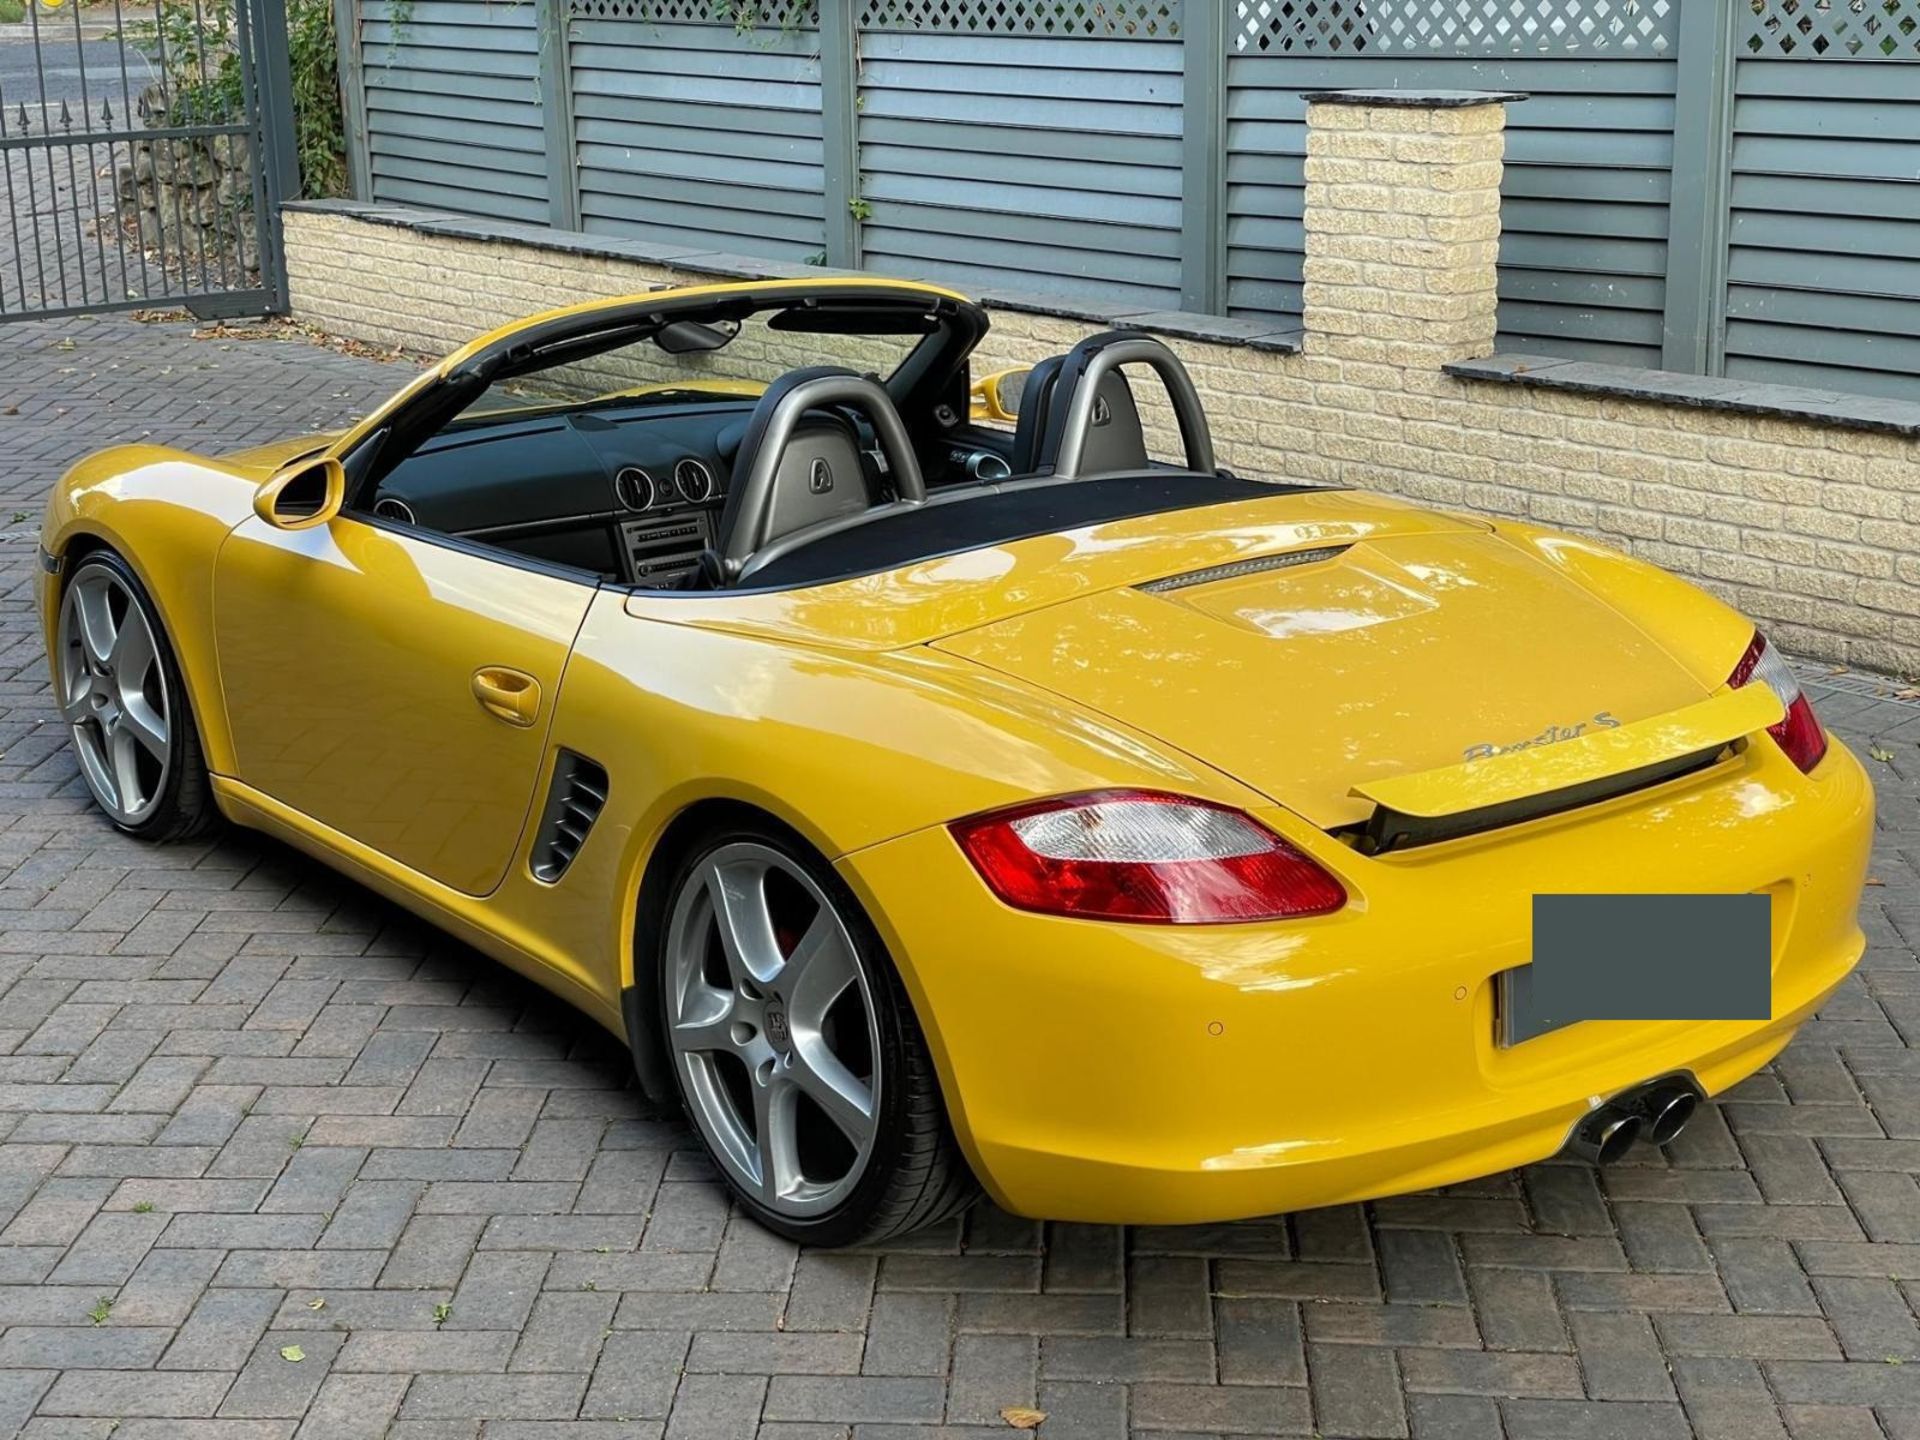 EYE CATCHING 2005 PORSCHE BOXSTER S YELLOW CONVERTIBLE - 105K MILES - 2 KEYS - 20 INCH ALLOYS - Image 4 of 10